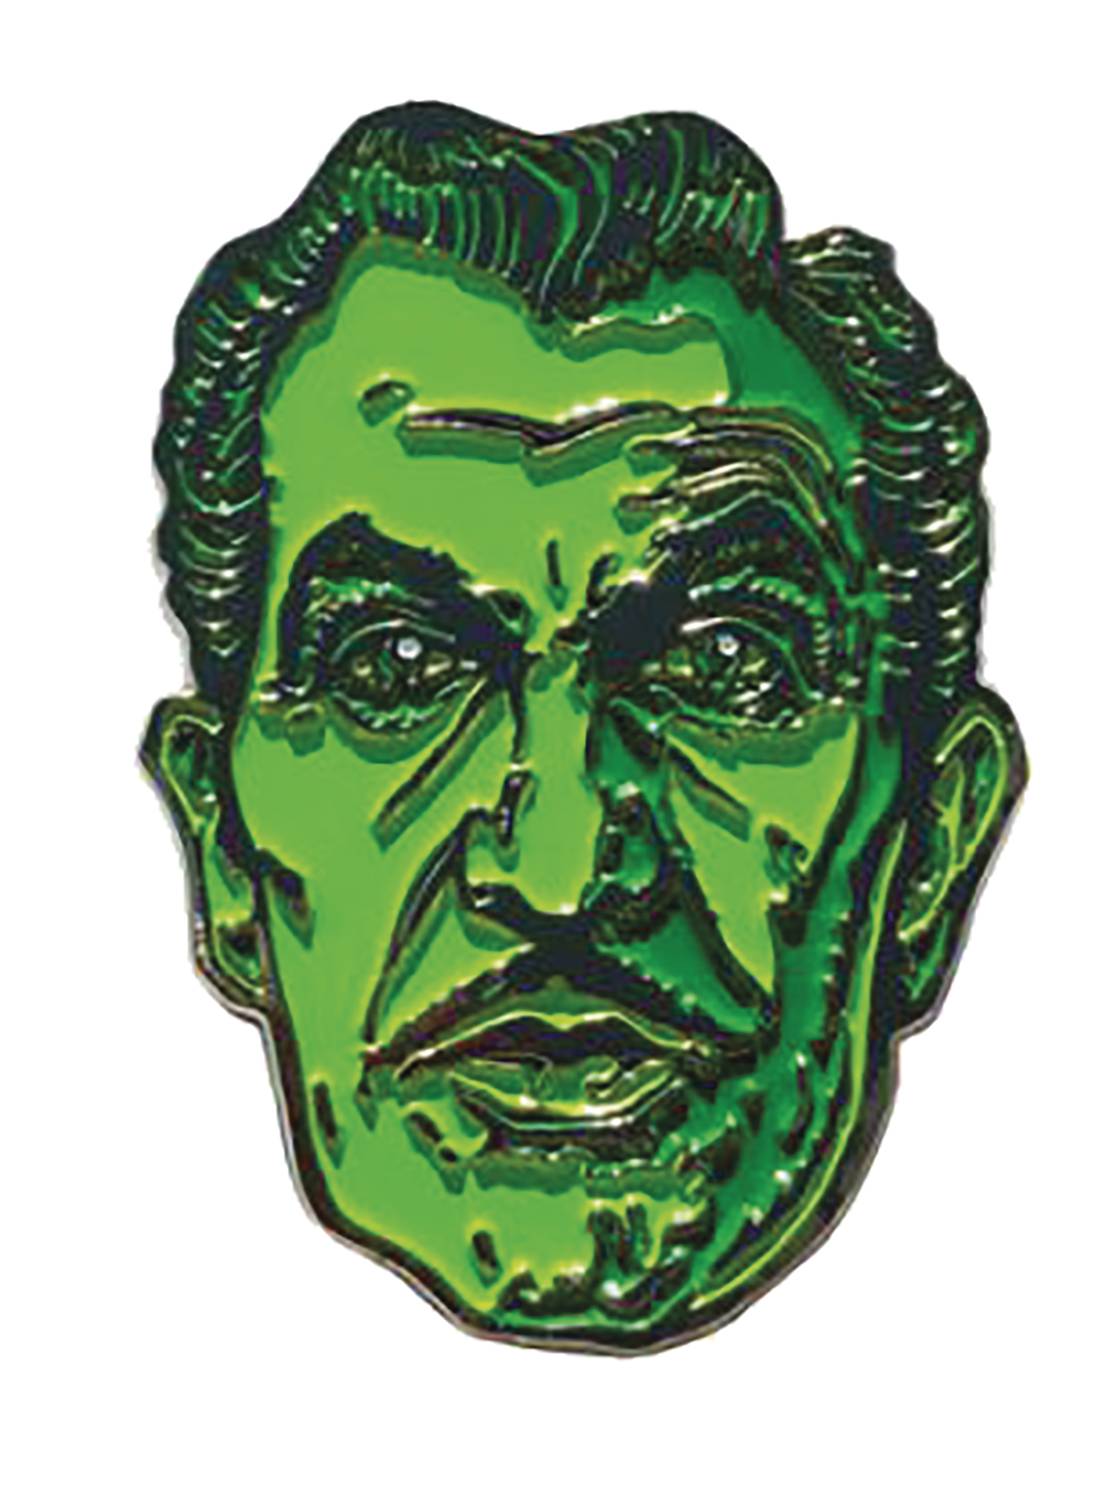 VINCENT PRICE CLASSIC FACE PIN